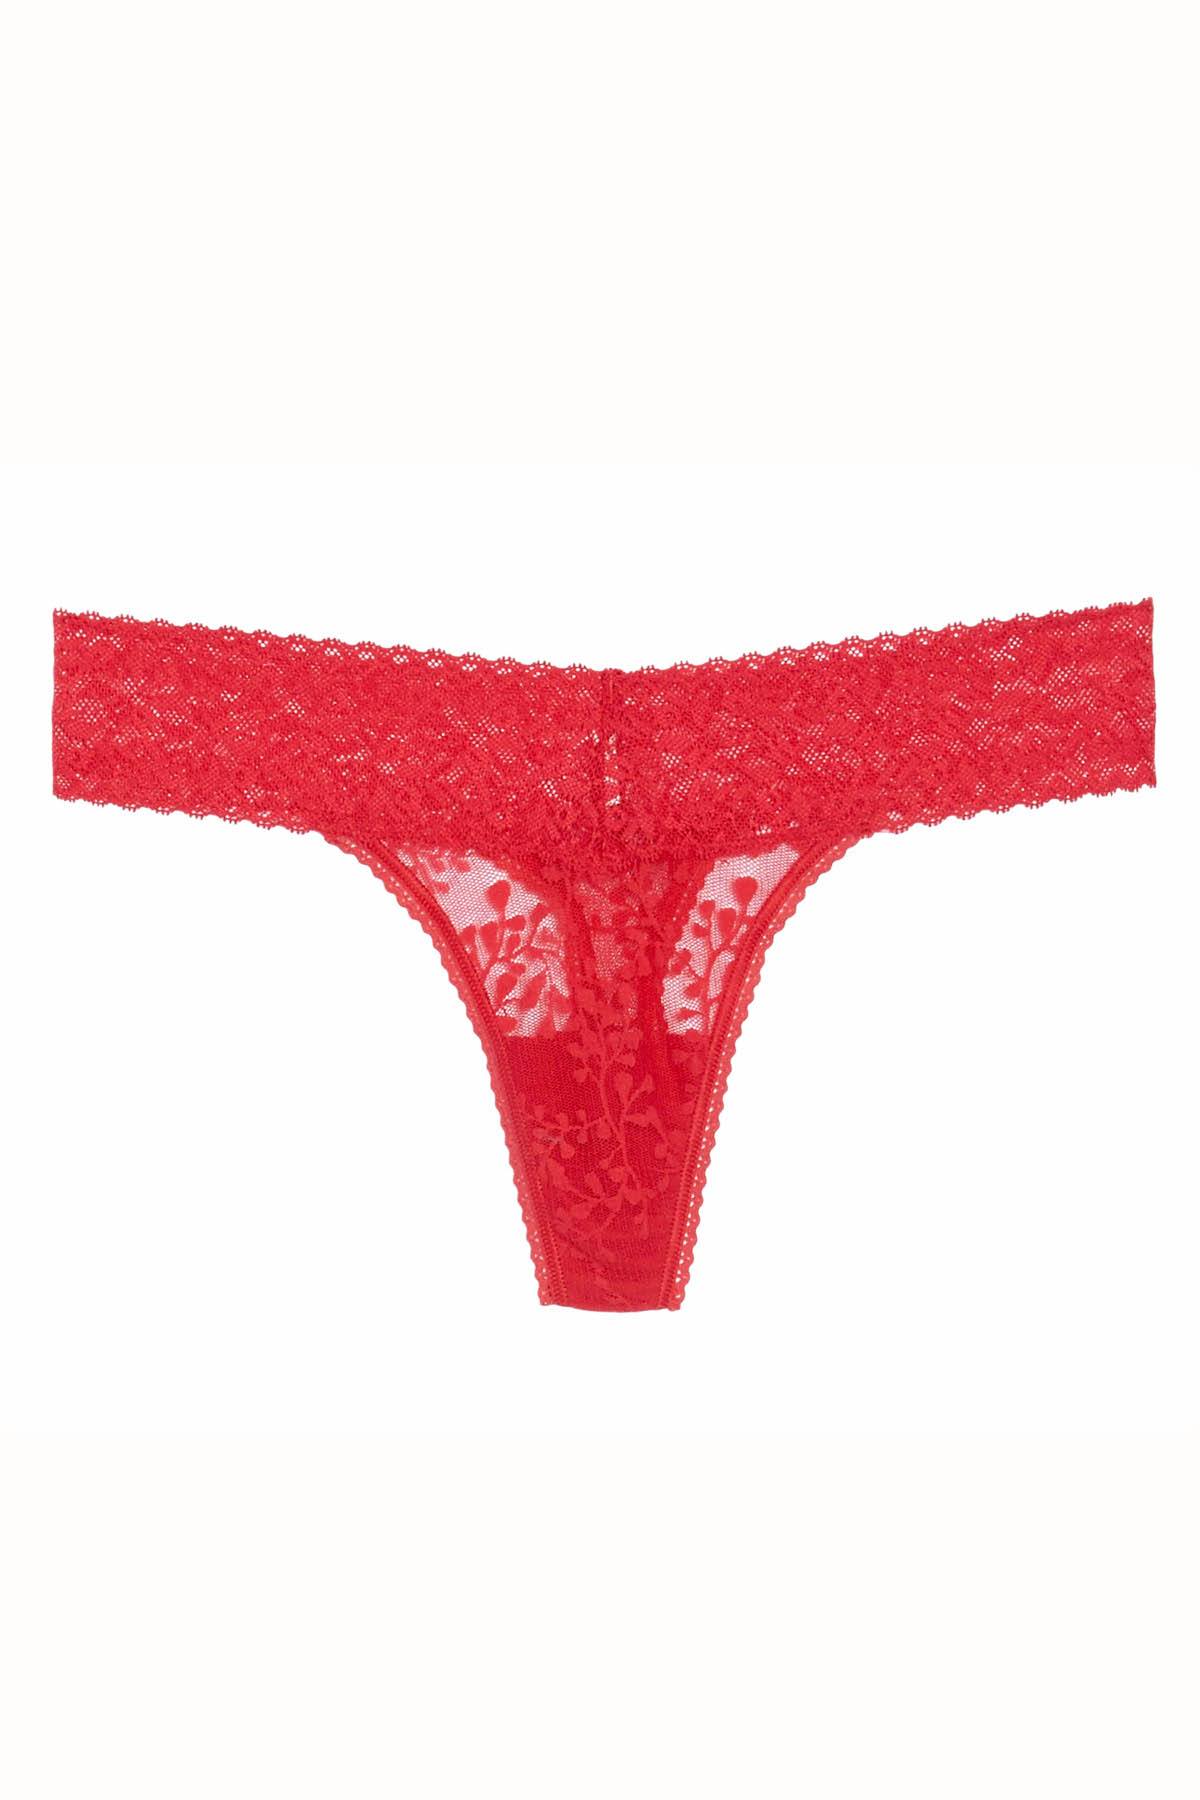 Calvin Klein Empower Red Bare Lace Thong Cheapundies